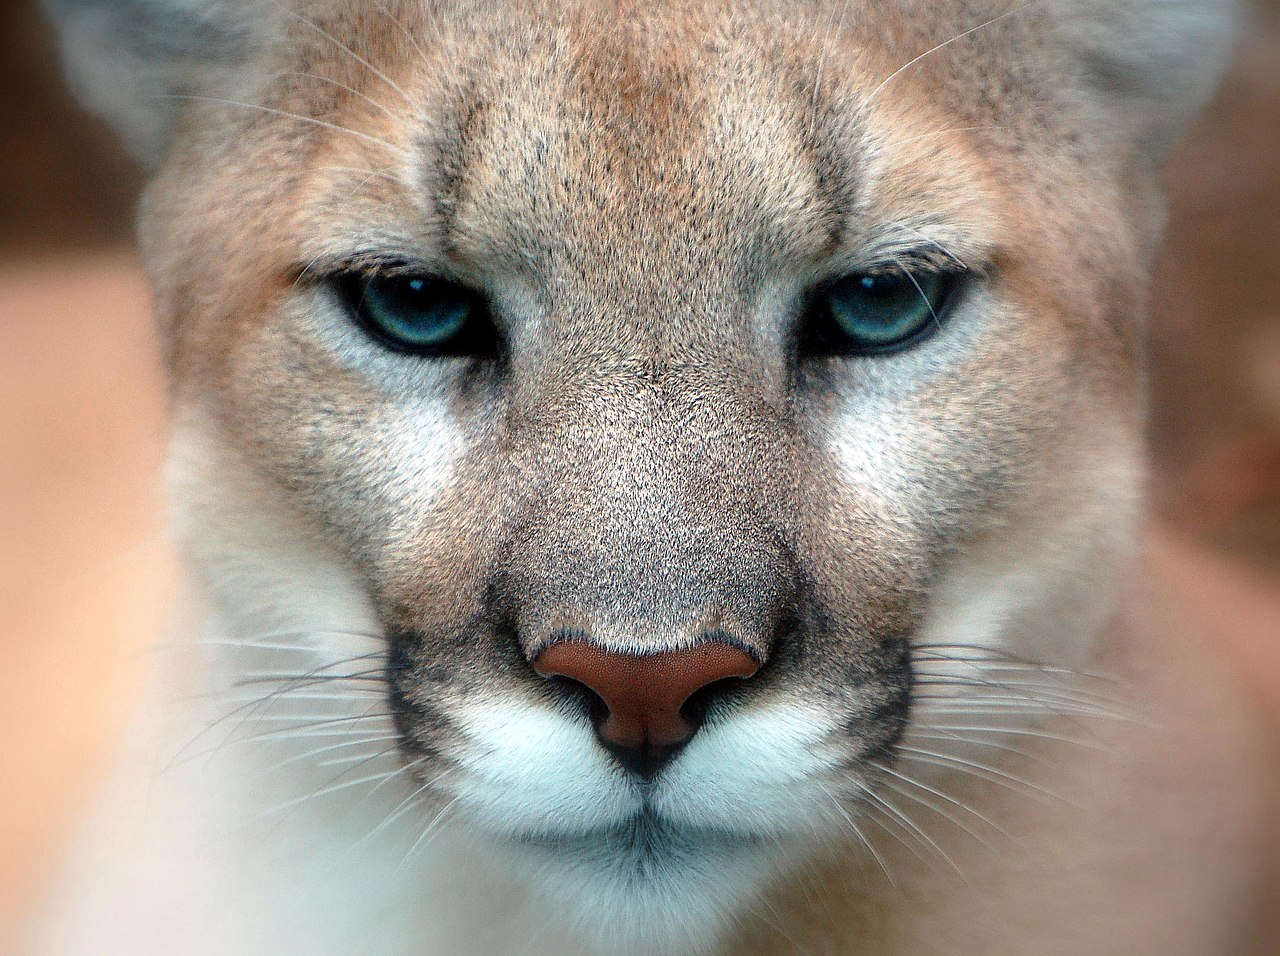 Cougar closeup, courtesy of wikipedia commons